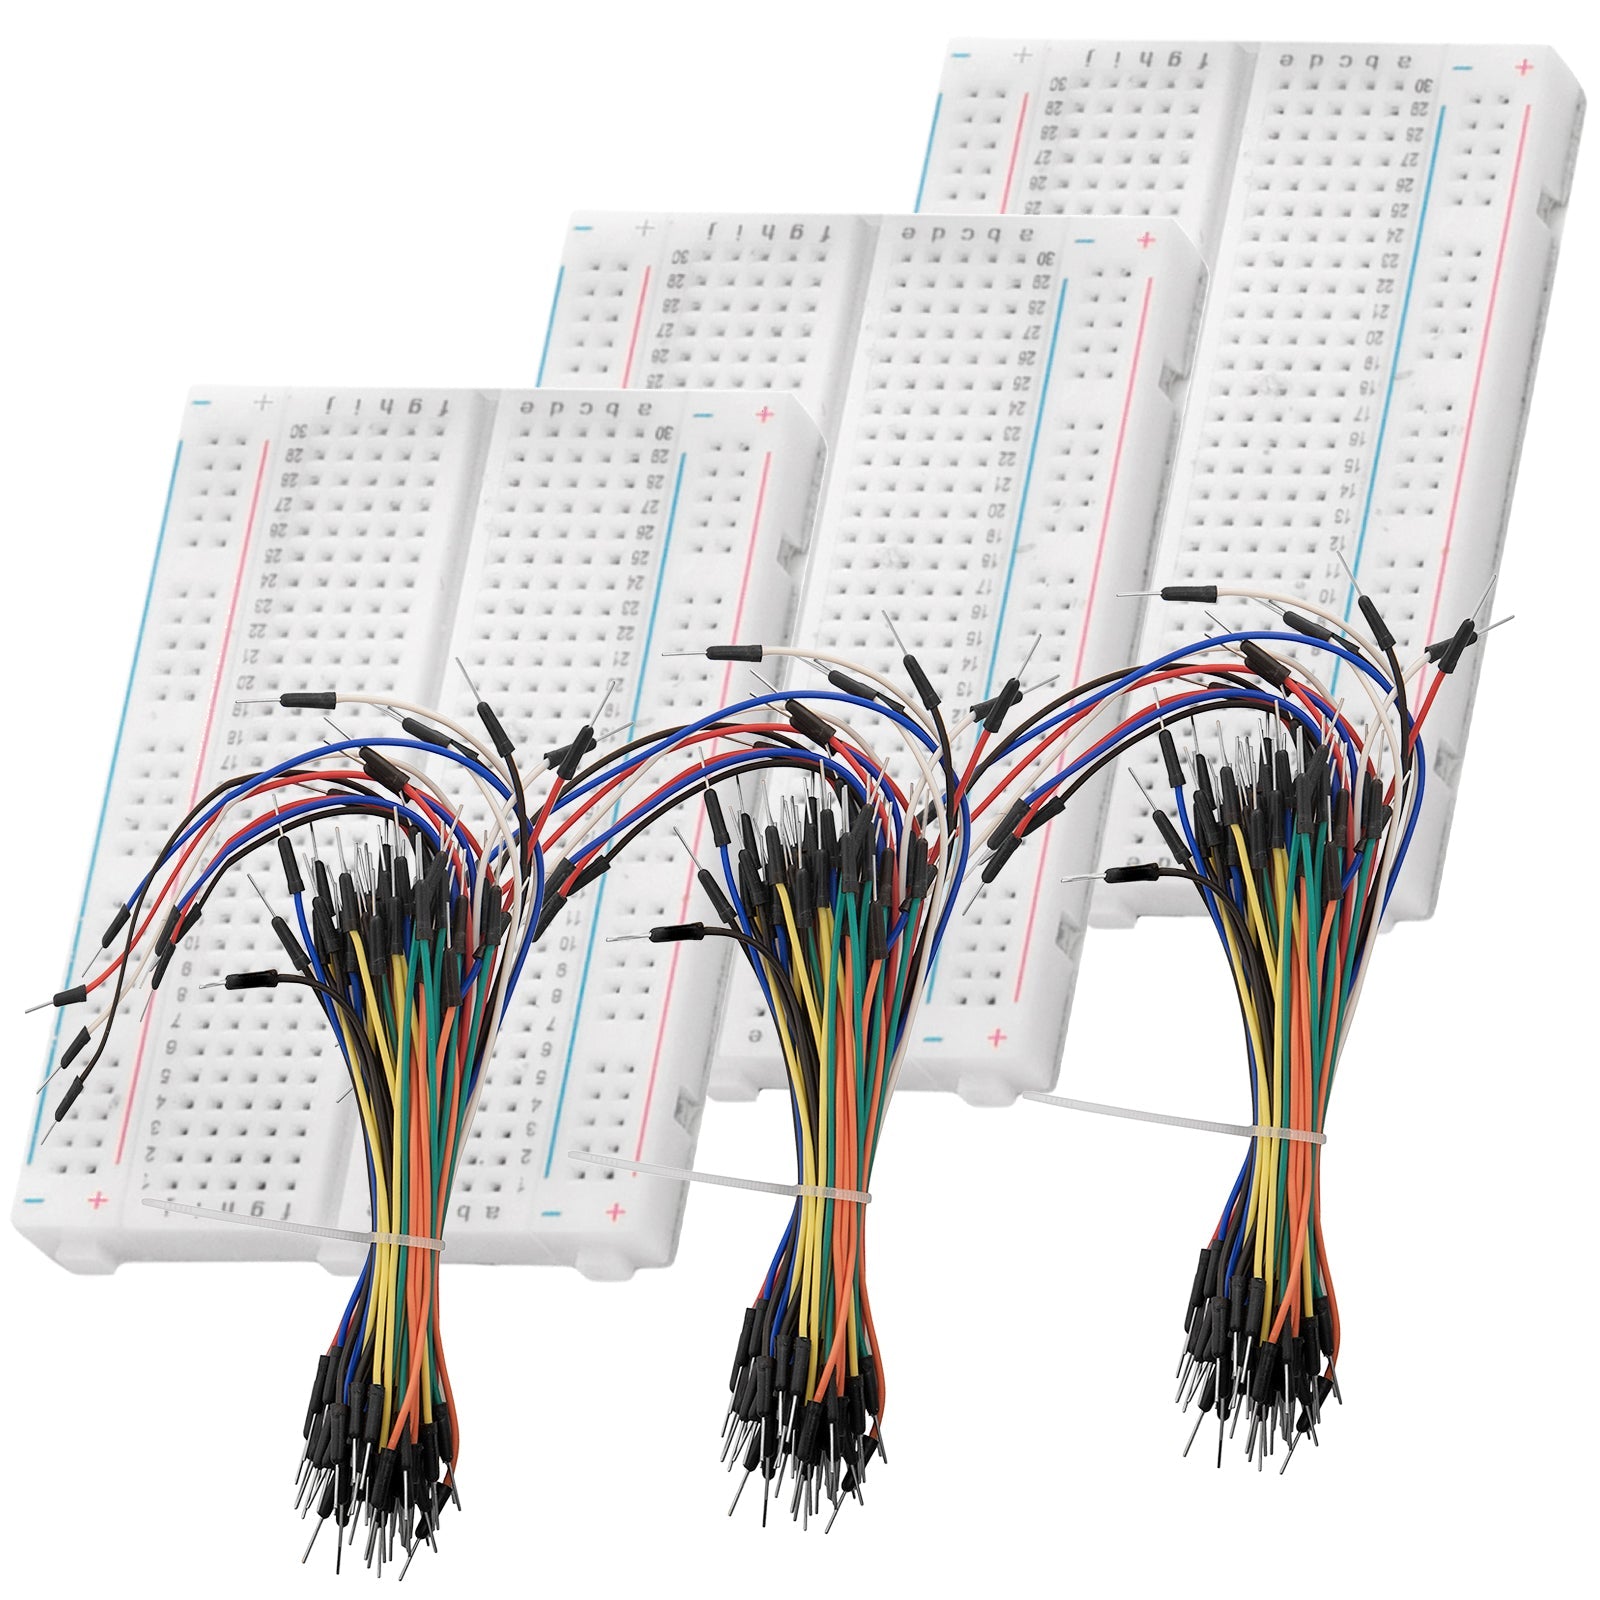 3 Packs M/M Breadboard Jumper Wire Kit for breadboards, compatible